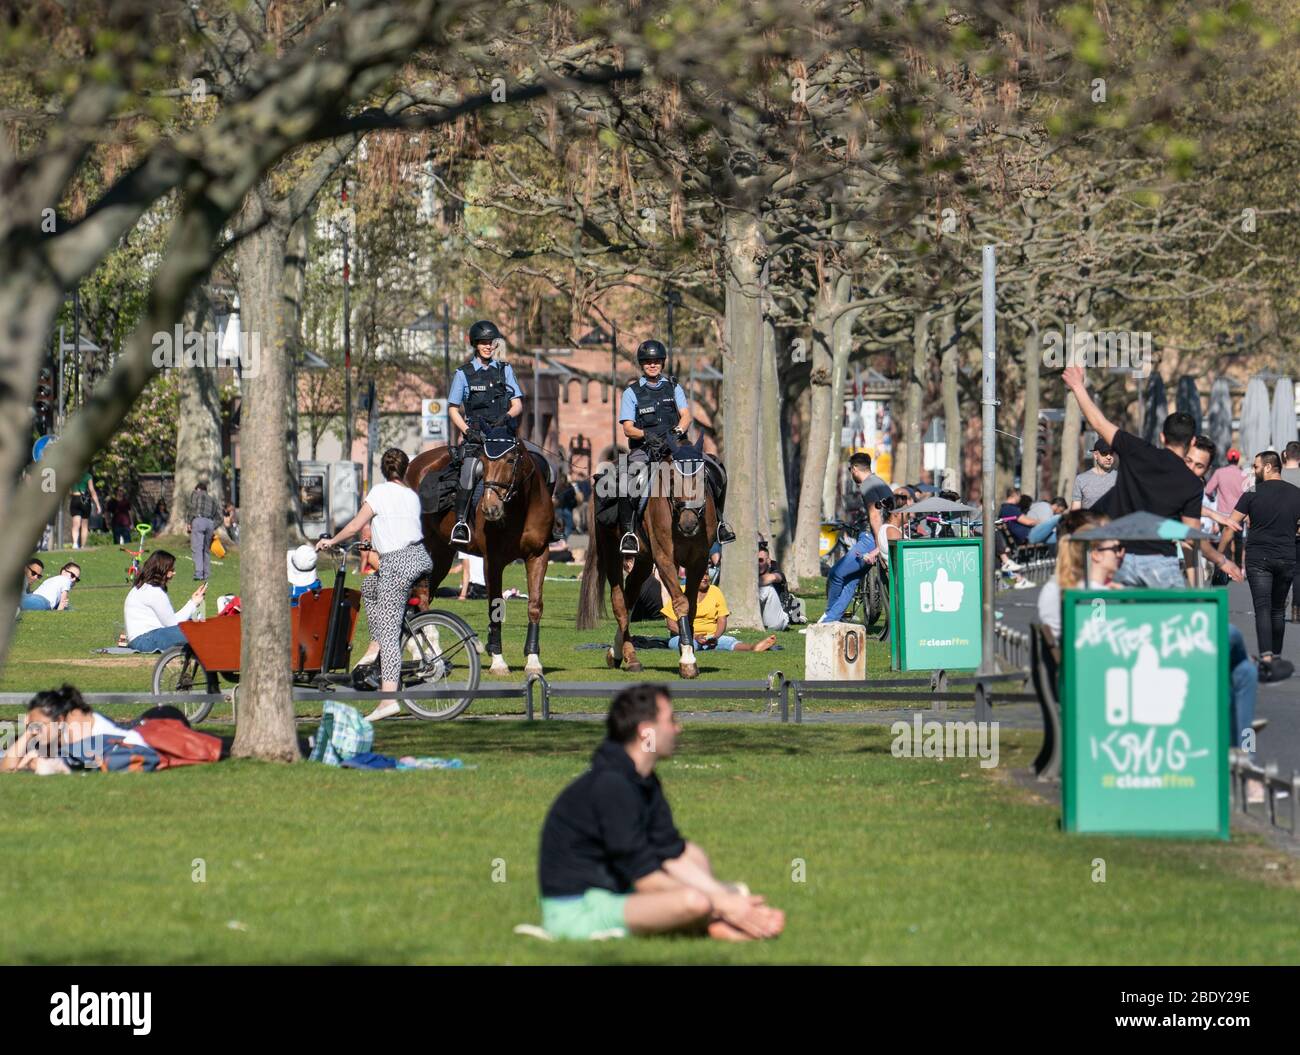 10 April 2020, Hessen, Frankfurt/Main: Two policewomen (M) ride on their horses over the meadows populated by people along the northern bank of the Main River and check that the ban on contact, which is still in place because of the corona pandemic, is being observed. Photo: Frank Rumpenhorst/dpa Stock Photo